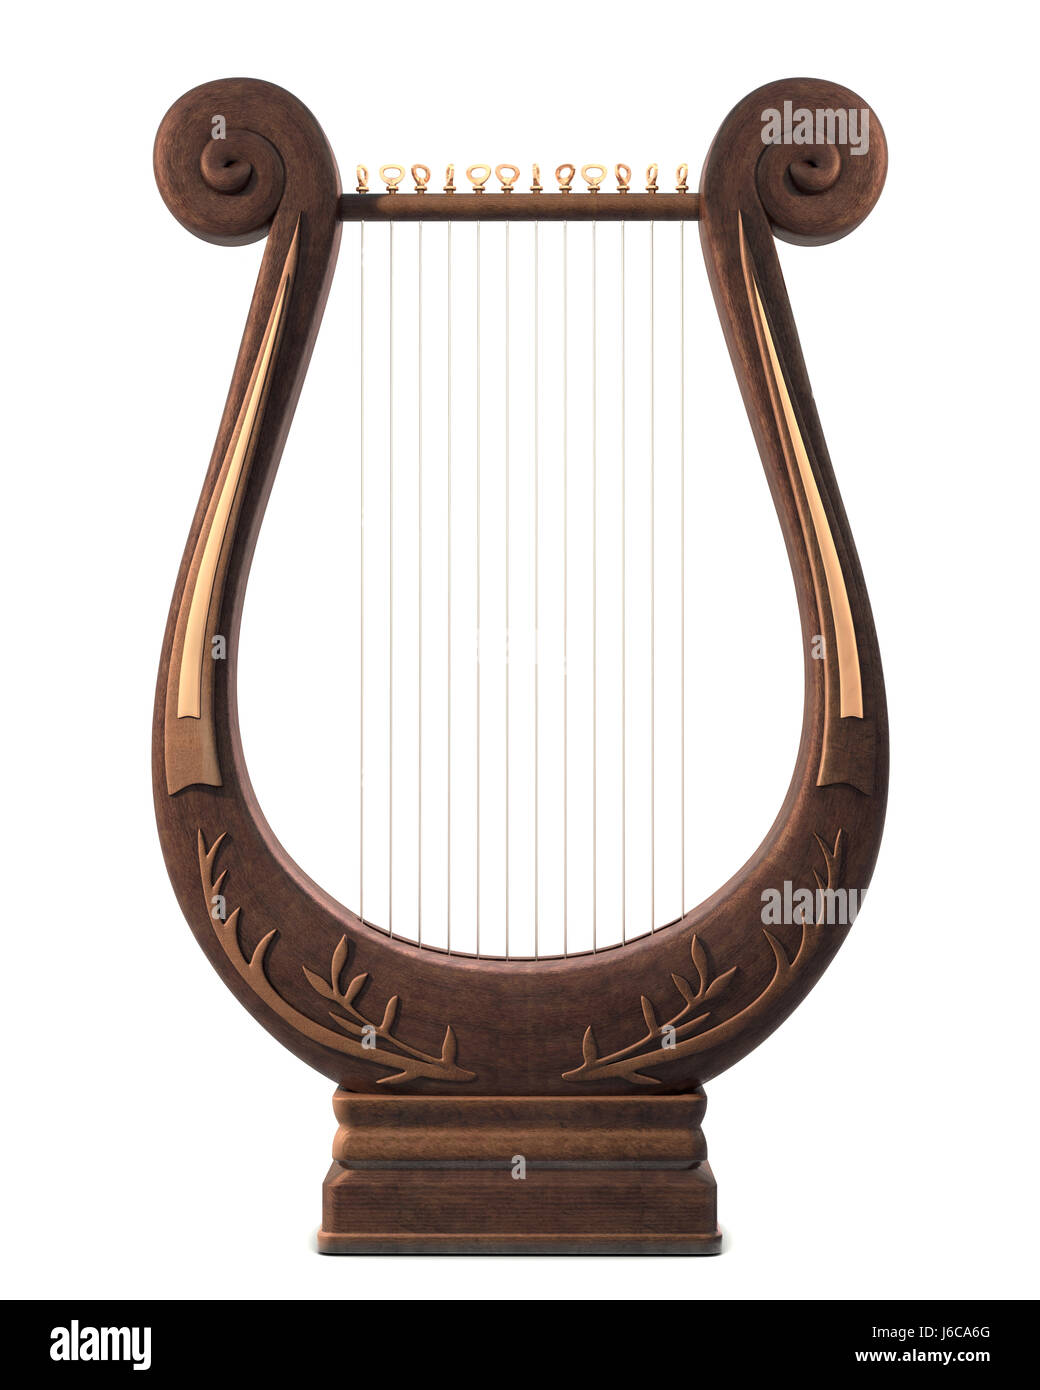 Lyre instrument Cut Out Stock Images & Pictures - Alamy